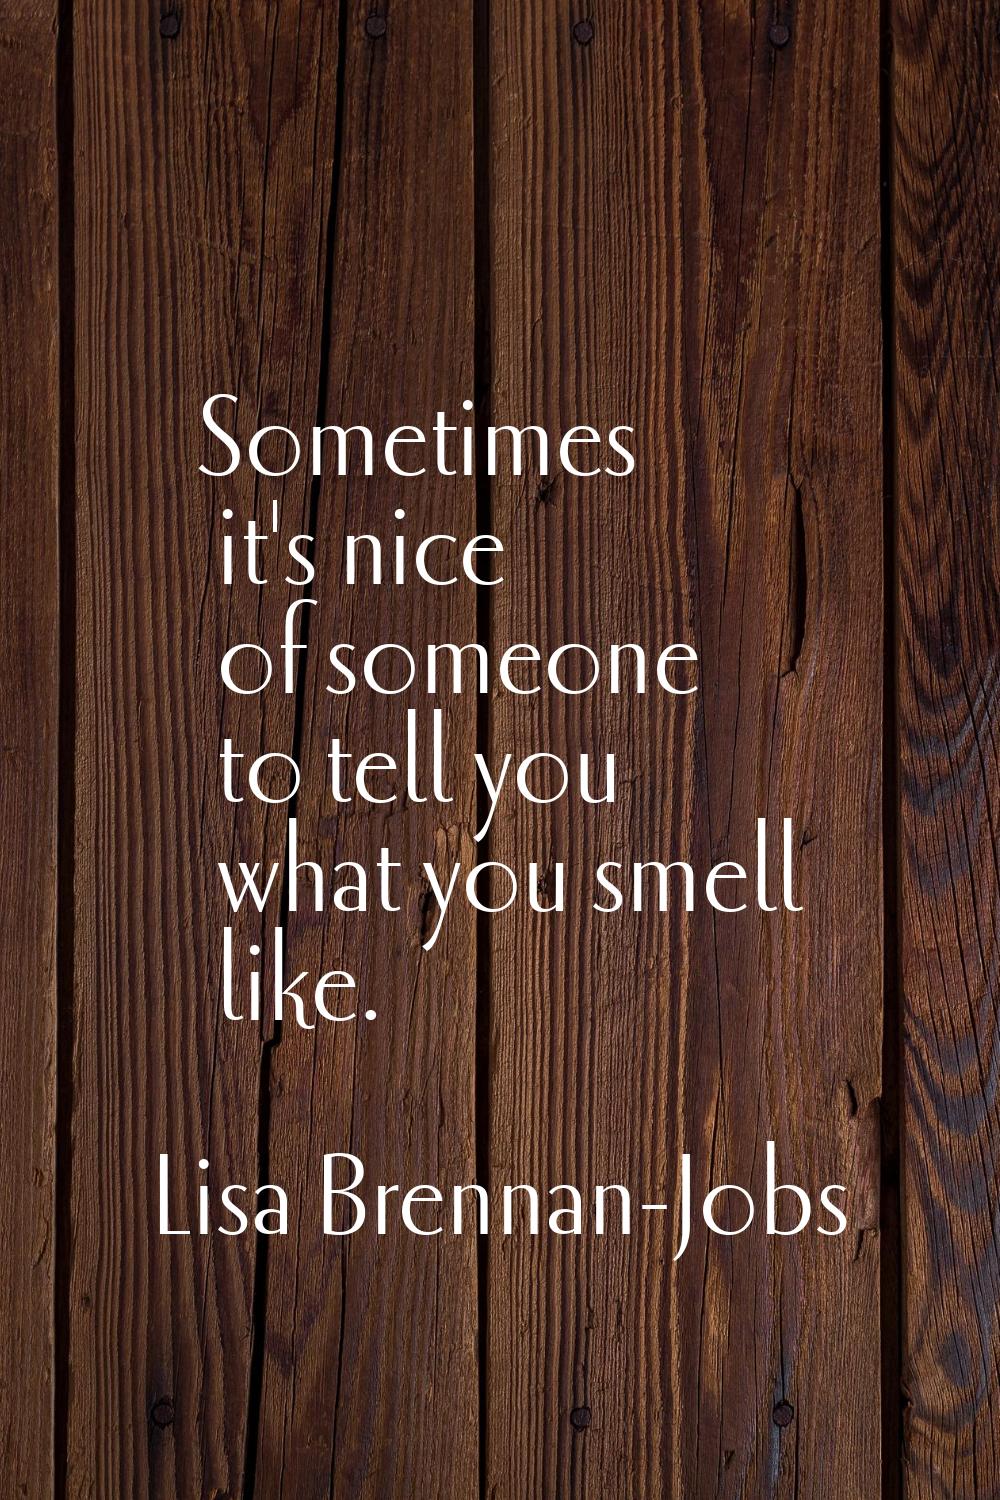 Sometimes it's nice of someone to tell you what you smell like.